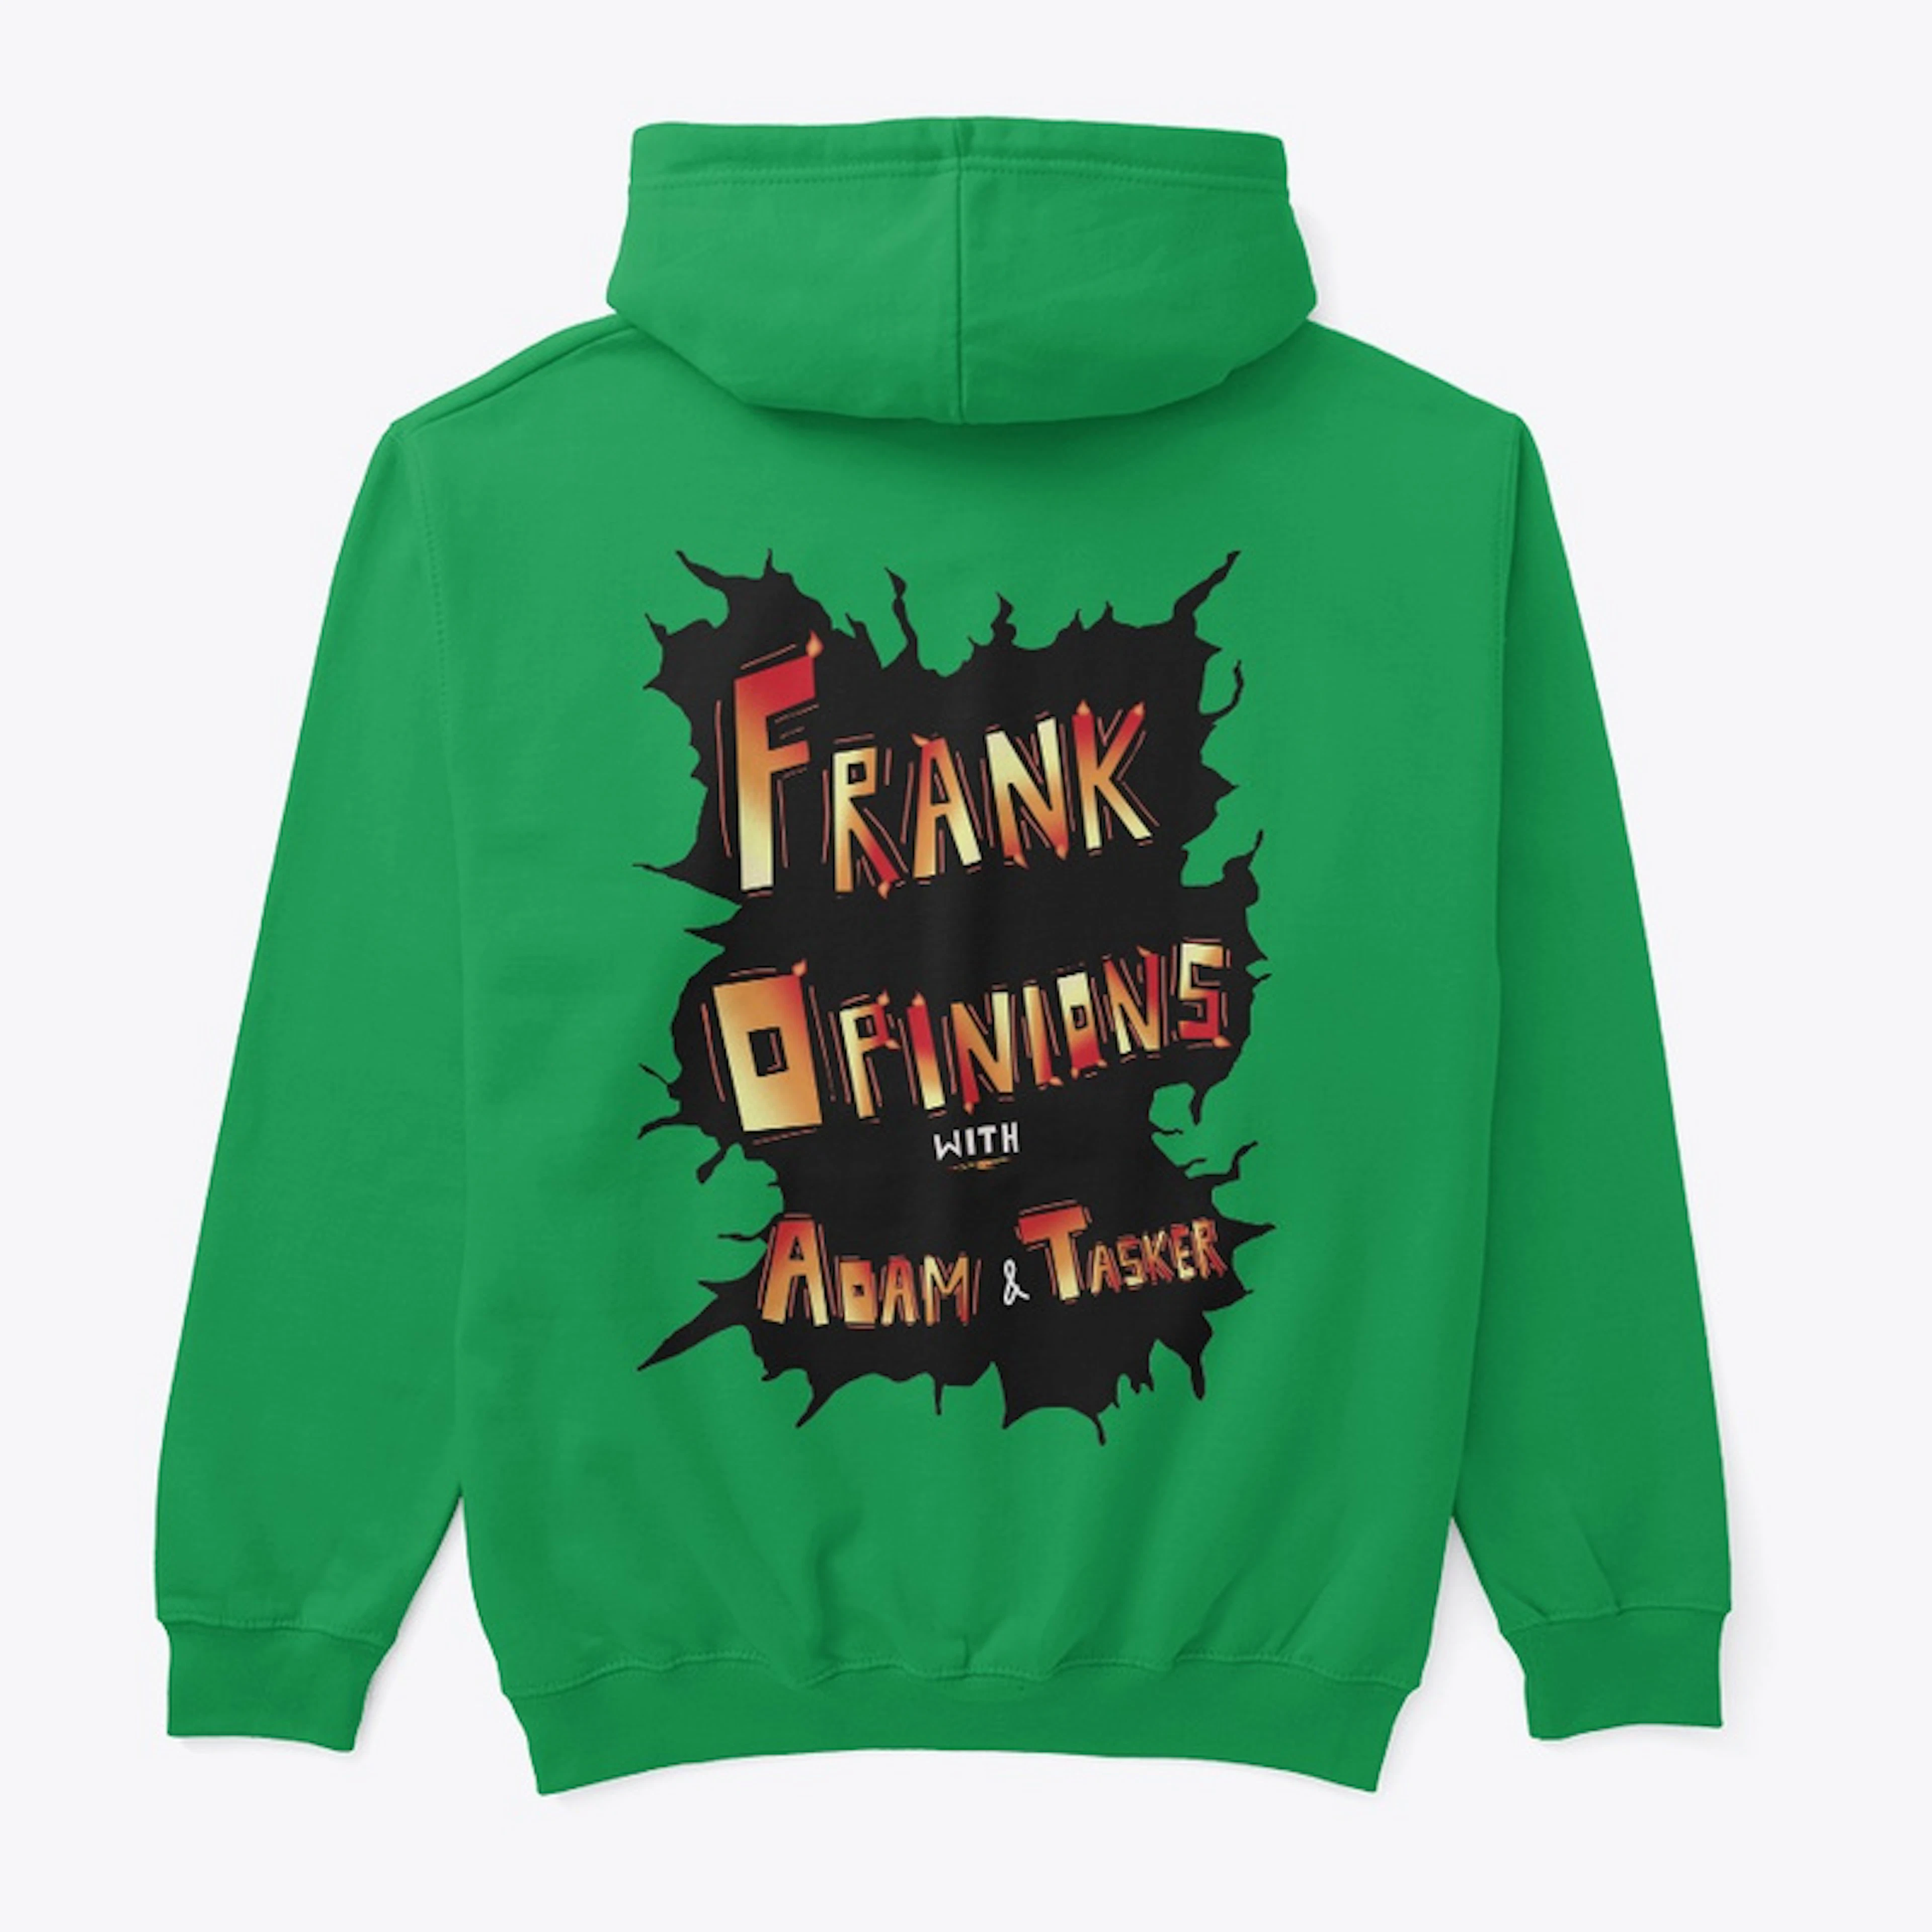 Frank Opinions 